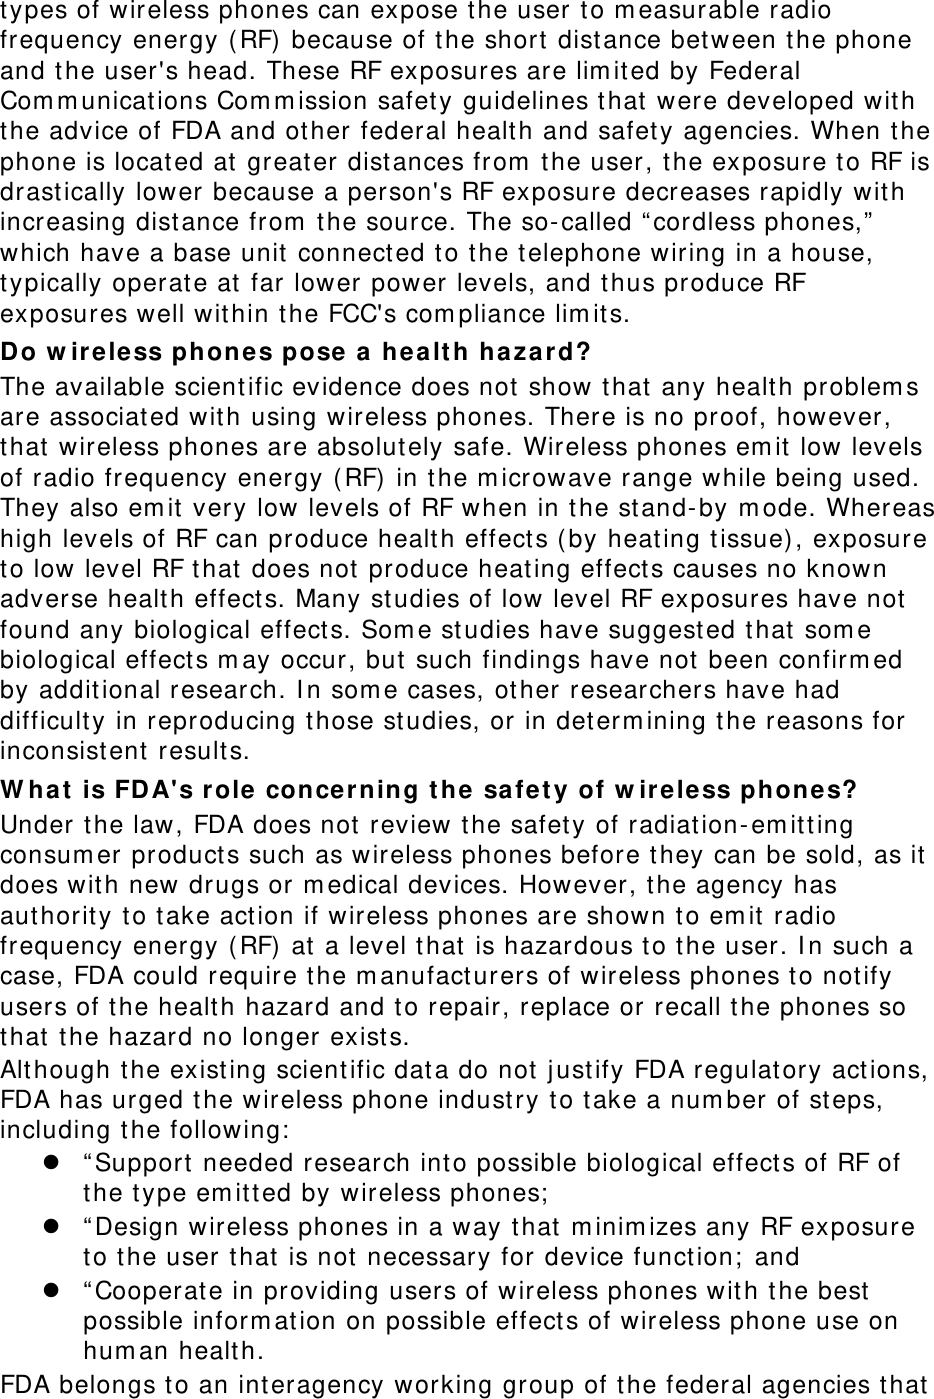 types of wireless phones can expose the user to m easurable radio frequency energy (RF)  because of t he short  distance bet ween t he phone and the user&apos;s head. These RF exposures are lim ited by Federal Com m unicat ions Com m ission safety guidelines t hat were developed with the advice of FDA and ot her federal healt h and safet y agencies. When the phone is located at greater dist ances from  the user, the exposure to RF is drast ically lower because a person&apos;s RF exposure decreases rapidly wit h increasing dist ance from  the source. The so-called “ cordless phones,”  which have a base unit  connect ed t o t he telephone wiring in a house, typically operat e at far lower power levels, and thus produce RF exposures well wit hin the FCC&apos;s com pliance lim its. Do w ireless phones pose a he a lth ha za r d? The available scientific evidence does not show that any healt h pr oblem s are associat ed with using w ireless phones. There is no proof, however, that  wireless phones are absolut ely safe. Wireless phones em it  low levels of radio frequency energy ( RF) in t he m icrowave range while being used. They also em it  very  low levels of RF when in the st and-by m ode. Whereas high levels of RF can produce healt h effect s ( by heat ing t issue) , exposure to low level RF t hat does not produce heating effect s causes no known adverse healt h effect s. Many studies of low level RF exposures have not found any biological effect s. Som e st udies have suggest ed t hat som e biological effect s m ay occur, but  such findings have not been confirm ed by addit ional research. I n som e cases, ot her researchers have had difficult y in reproducing t hose studies, or in det erm ining the reasons for inconsist ent  result s. W hat  is FD A&apos;s role concer ning t he  safet y of w ire less phone s? Under t he law, FDA does not  review the safety of radiation-em itt ing consum er product s such as wireless phones before t hey can be sold, as it  does wit h new drugs or m edical dev ices. However, the agency has authorit y t o take action if w ireless phones are show n t o em it  radio frequency energy (RF)  at a level t hat is hazardous to the user. I n such a case, FDA could require t he m anufact urers of wireless phones to not ify users of the healt h hazard and to repair, replace or recall t he phones so that  t he hazard no longer exists. Although t he exist ing scientific dat a do not  j ust ify FDA regulat ory act ions, FDA has urged t he wireless phone indust ry to t ake a num ber of st eps, including t he following:   “ Support needed research int o possible biological effect s of RF of the type em it t ed by wireless phones;   “ Design wireless phones in a way t hat  m inim izes any RF exposure to the user t hat  is not  necessary for device funct ion;  and  “ Cooperate in providing users of wireless phones wit h t he best  possible inform at ion on possible effect s of wireless phone use on hum an healt h. FDA belongs to an interagency working group of the federal agencies t hat  